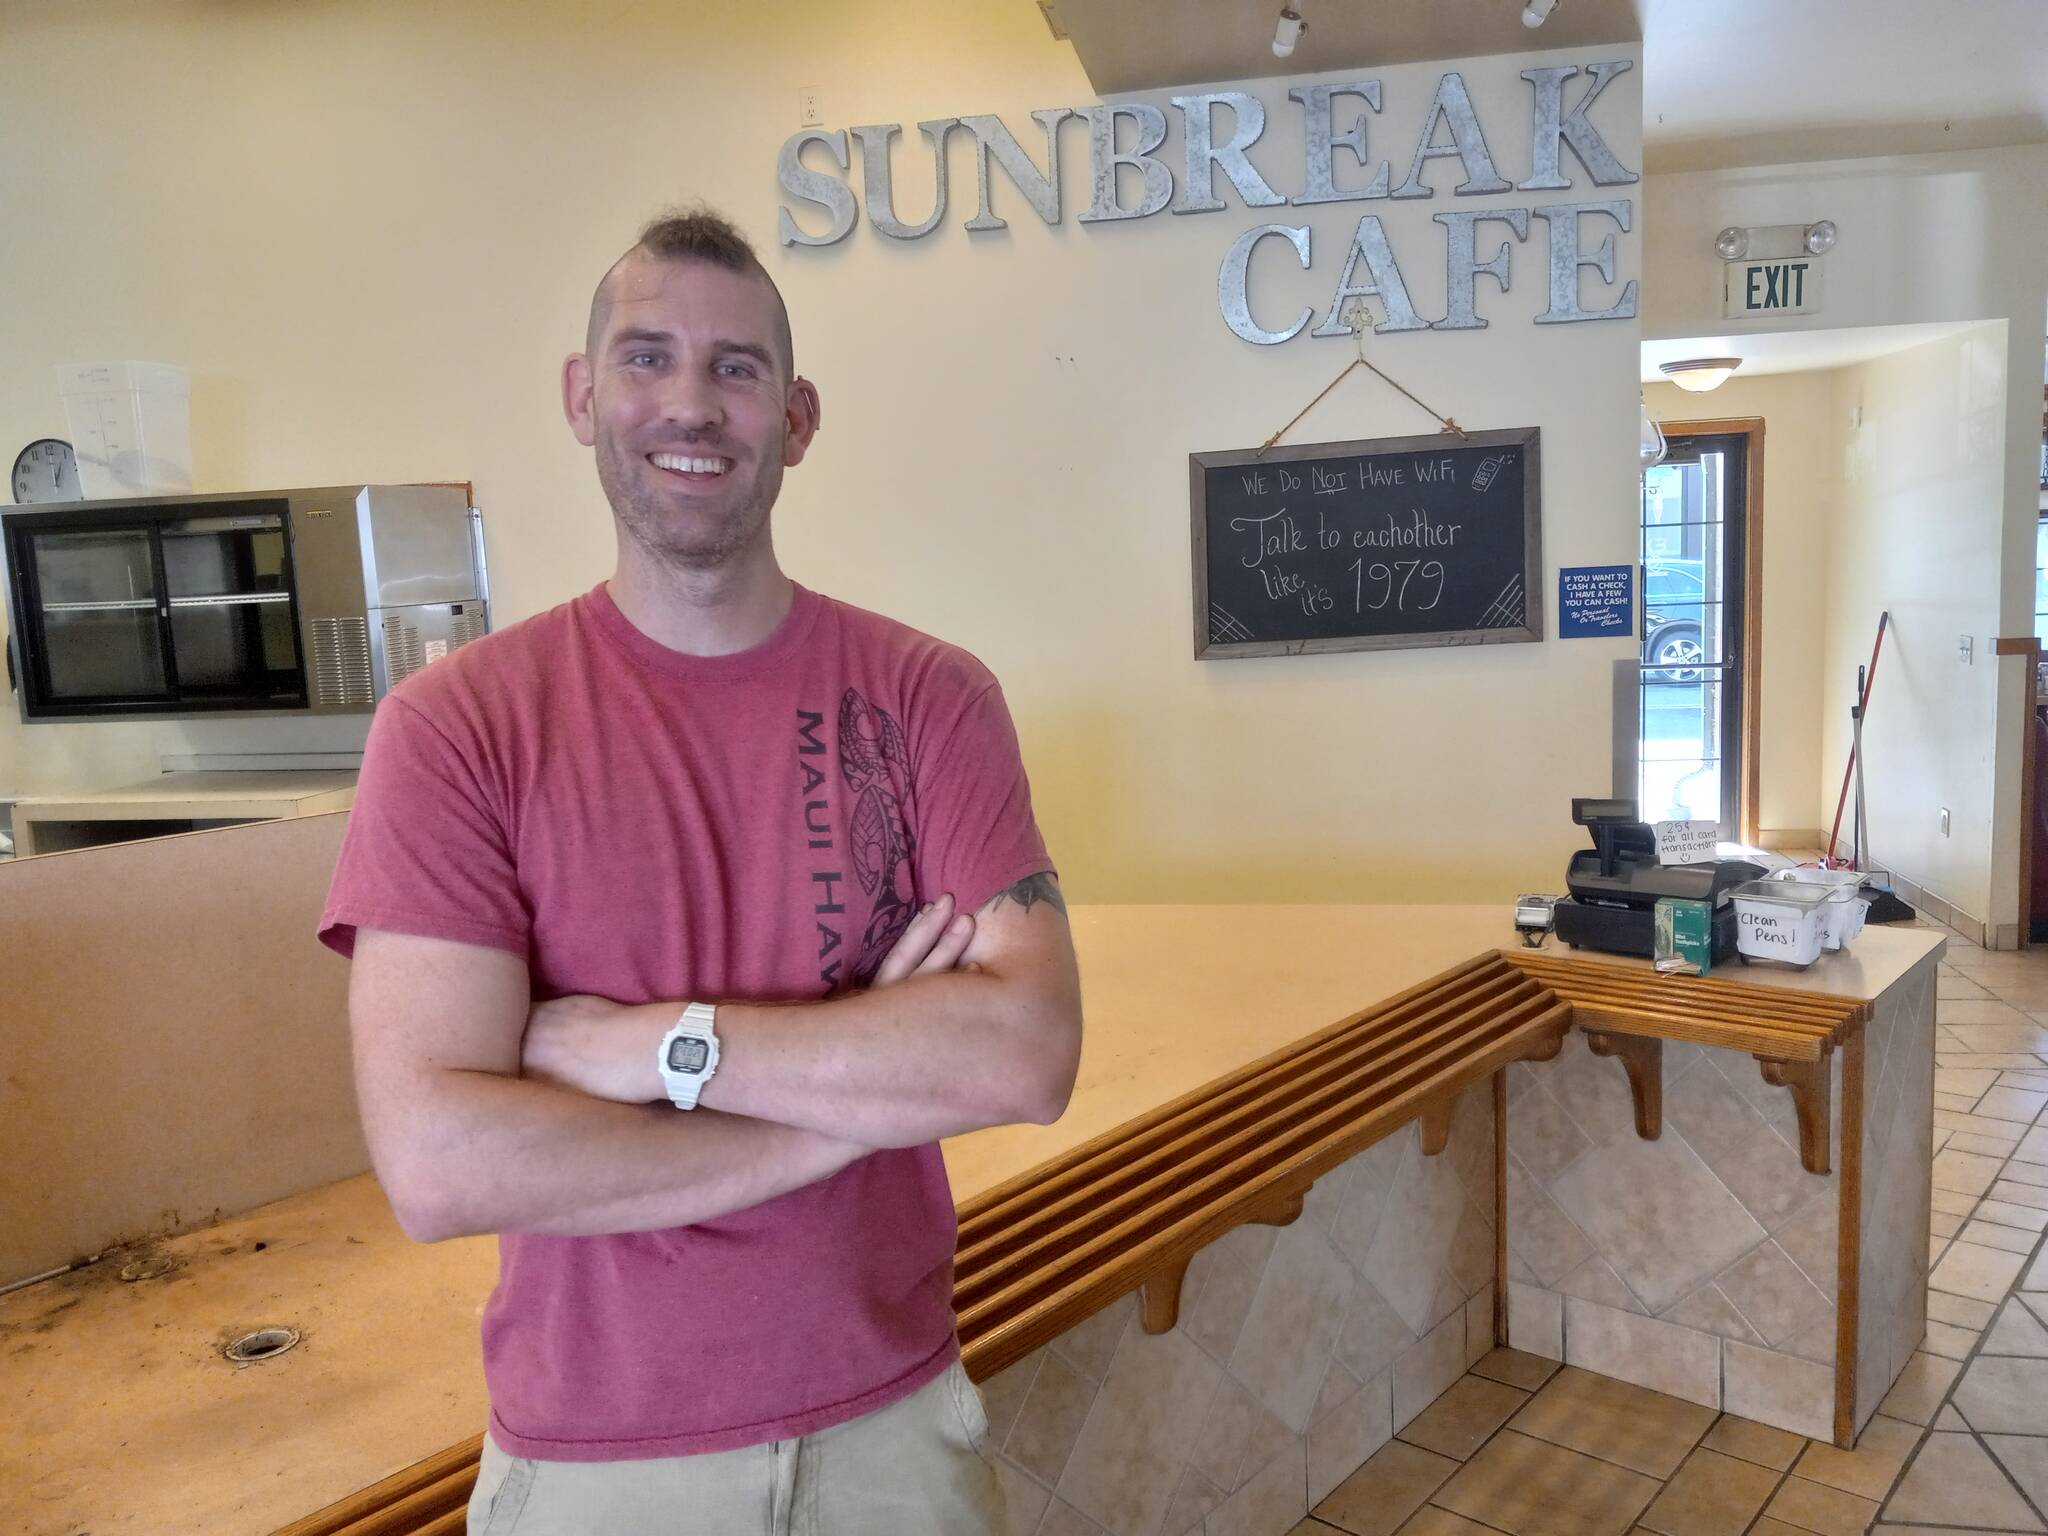 Photo by Robert Whale/Auburn Reporter
Thomas Hollern, owner of the Sun Break Cafe, which closed July 21 in Auburn.